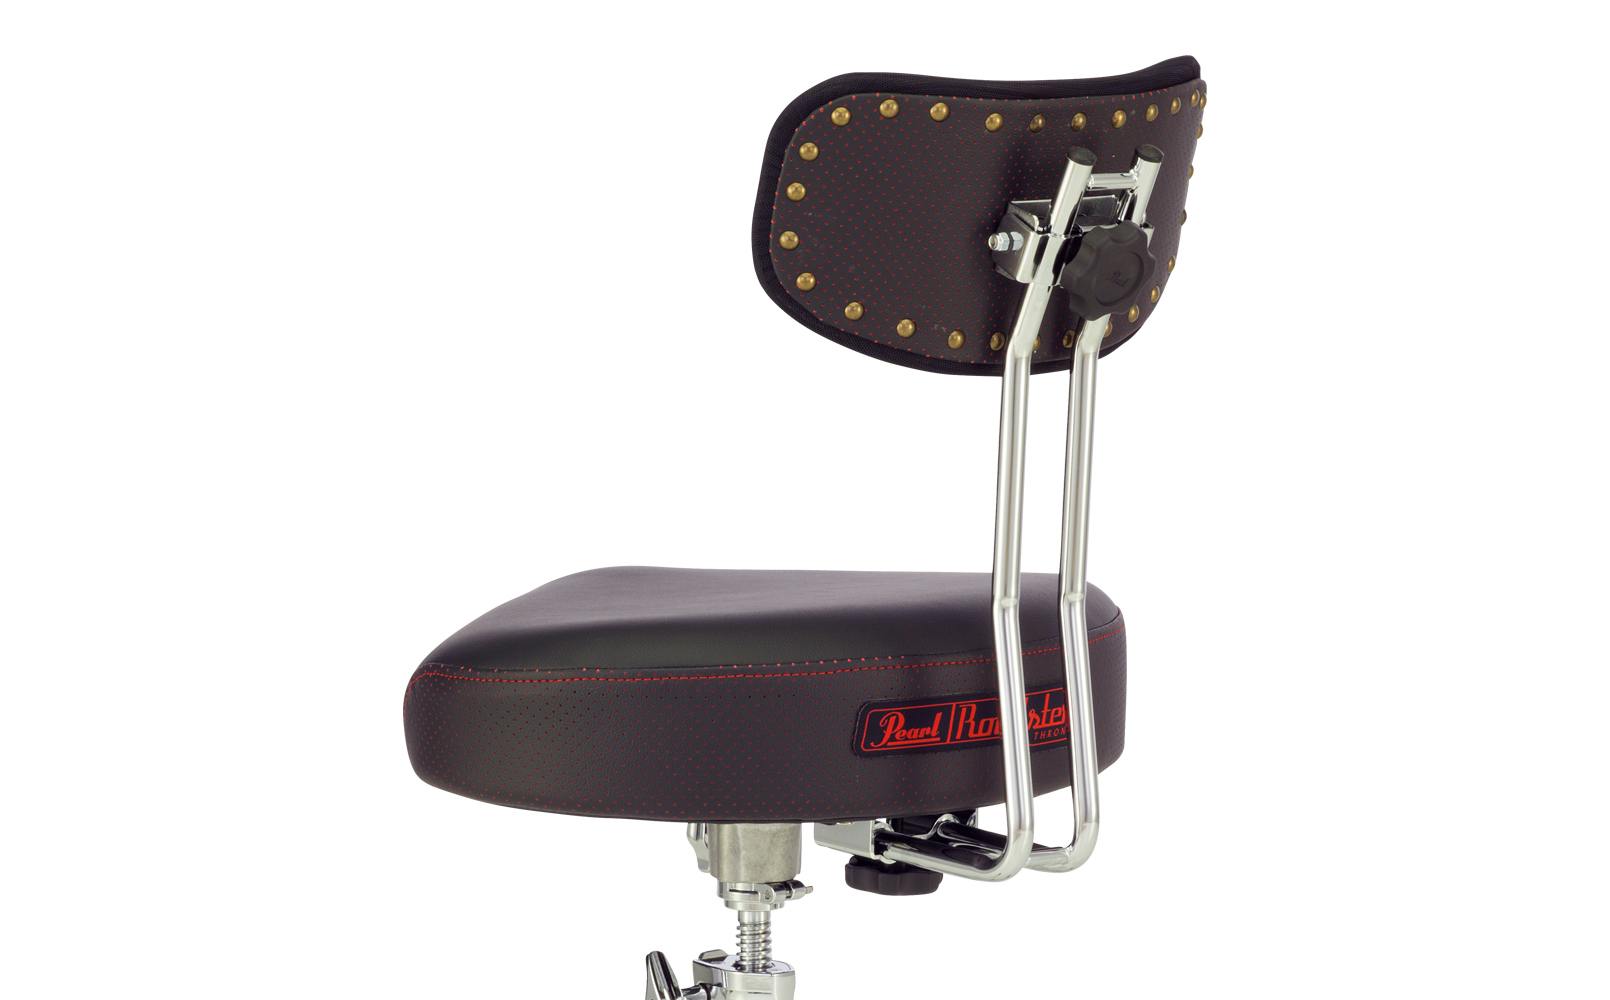 Throne　Music　Multi-Core　with　Saddle　Drum　Andertons　Pearl　Co.　Roadster　Backrest